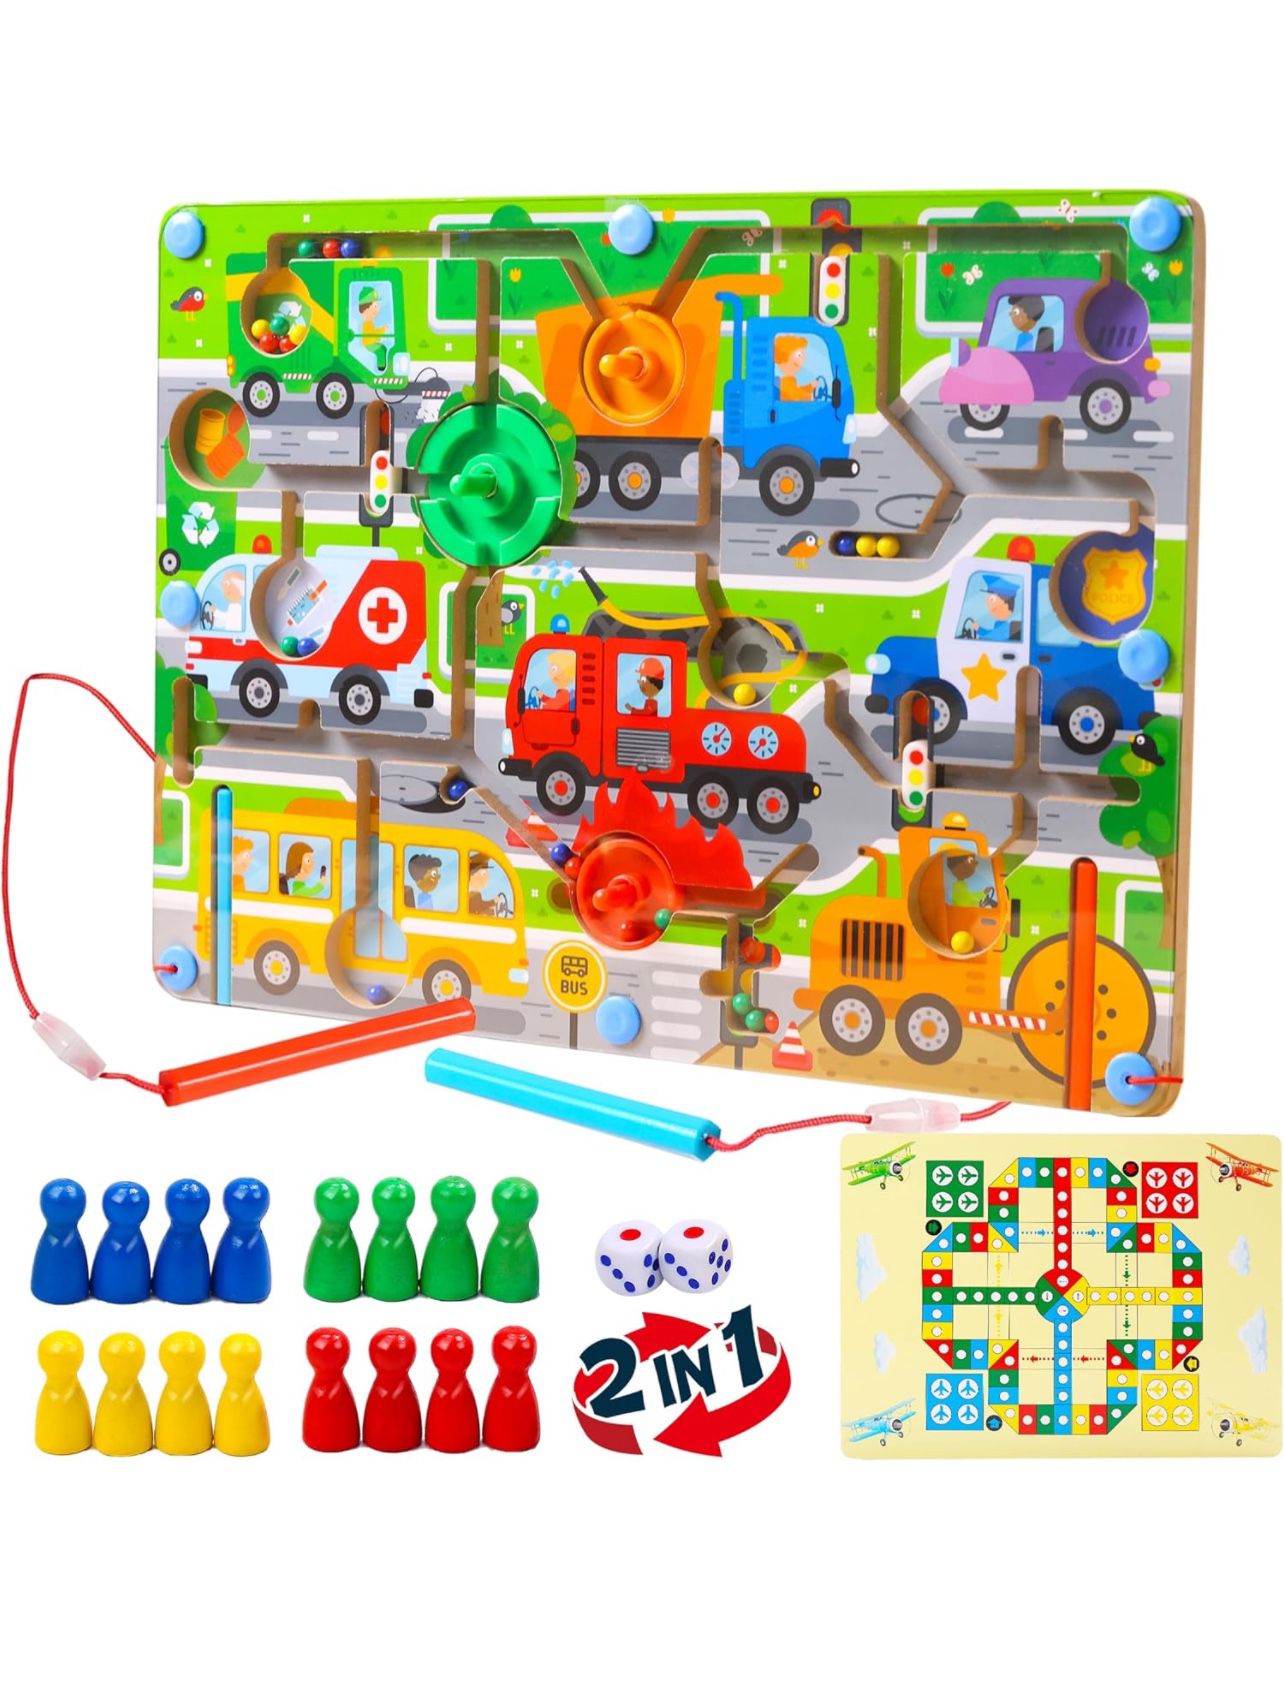 Brandnew Wooden Christmas Games Magnetic Maze Board, Magnetic Puzzle Game Board, Learning & Education Toys, Magnetic Maze Travel Toys for Kids